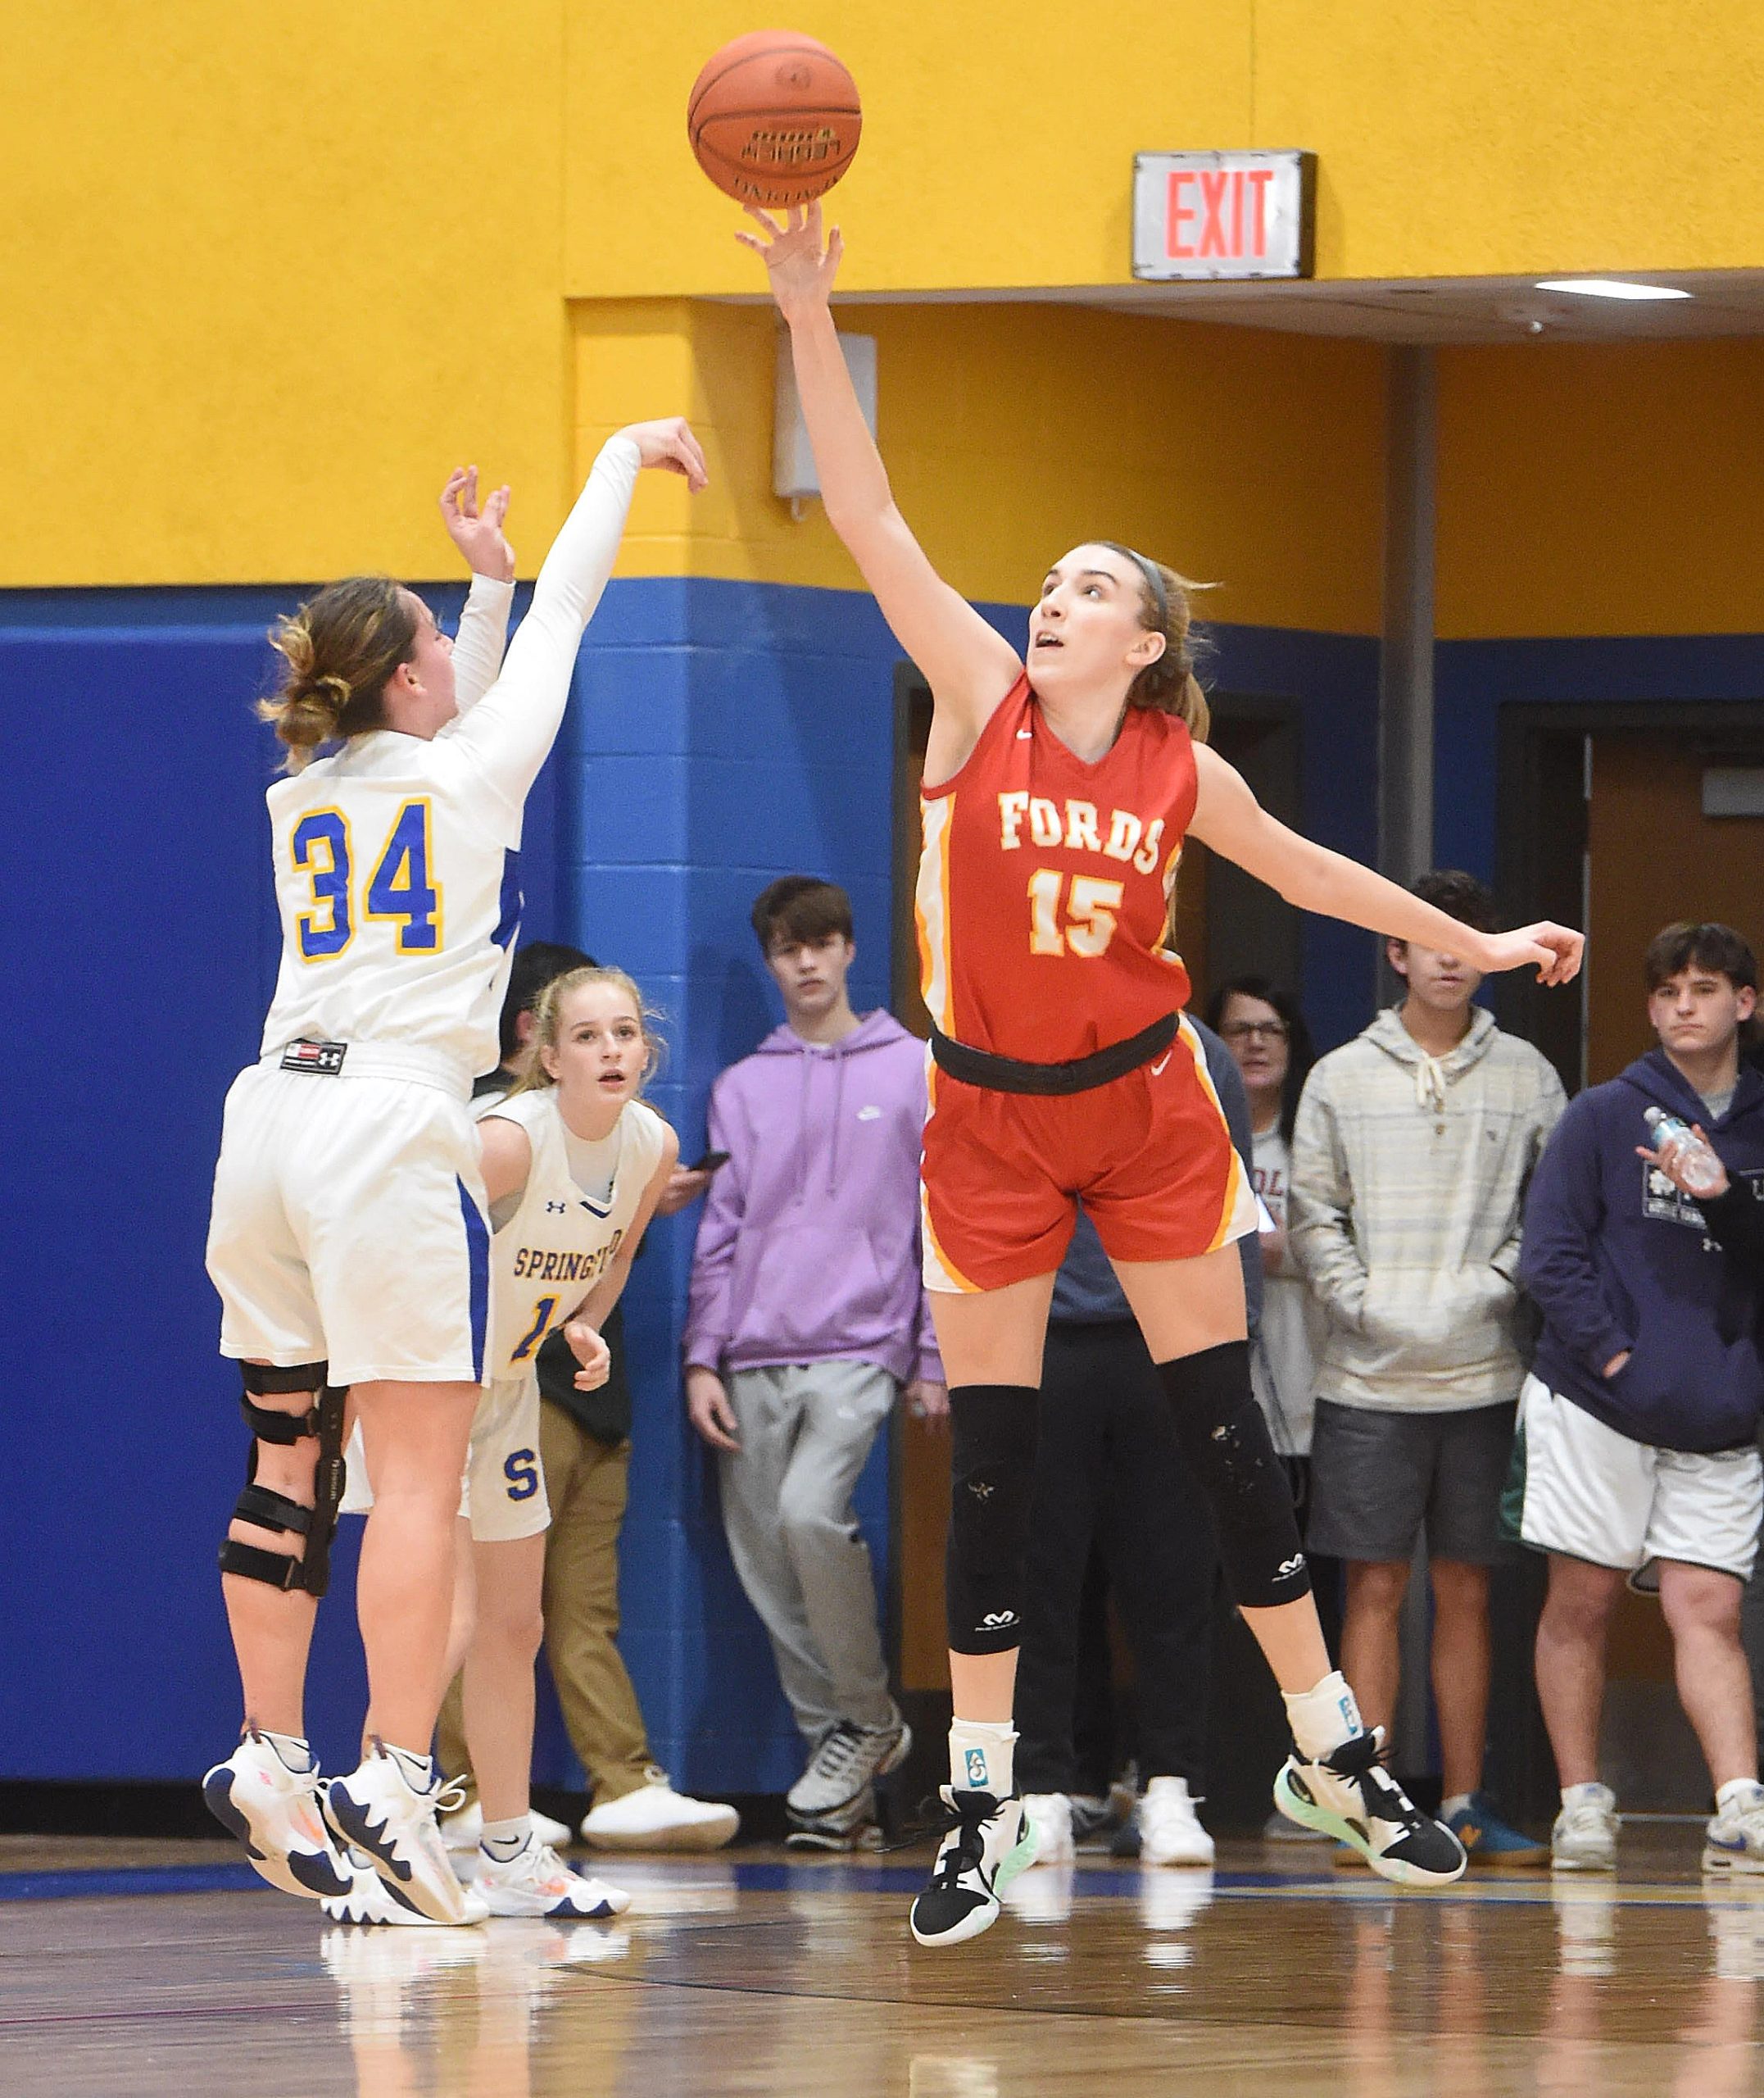 Girls Basketball Dotsey helps Haverford stay unbeaten